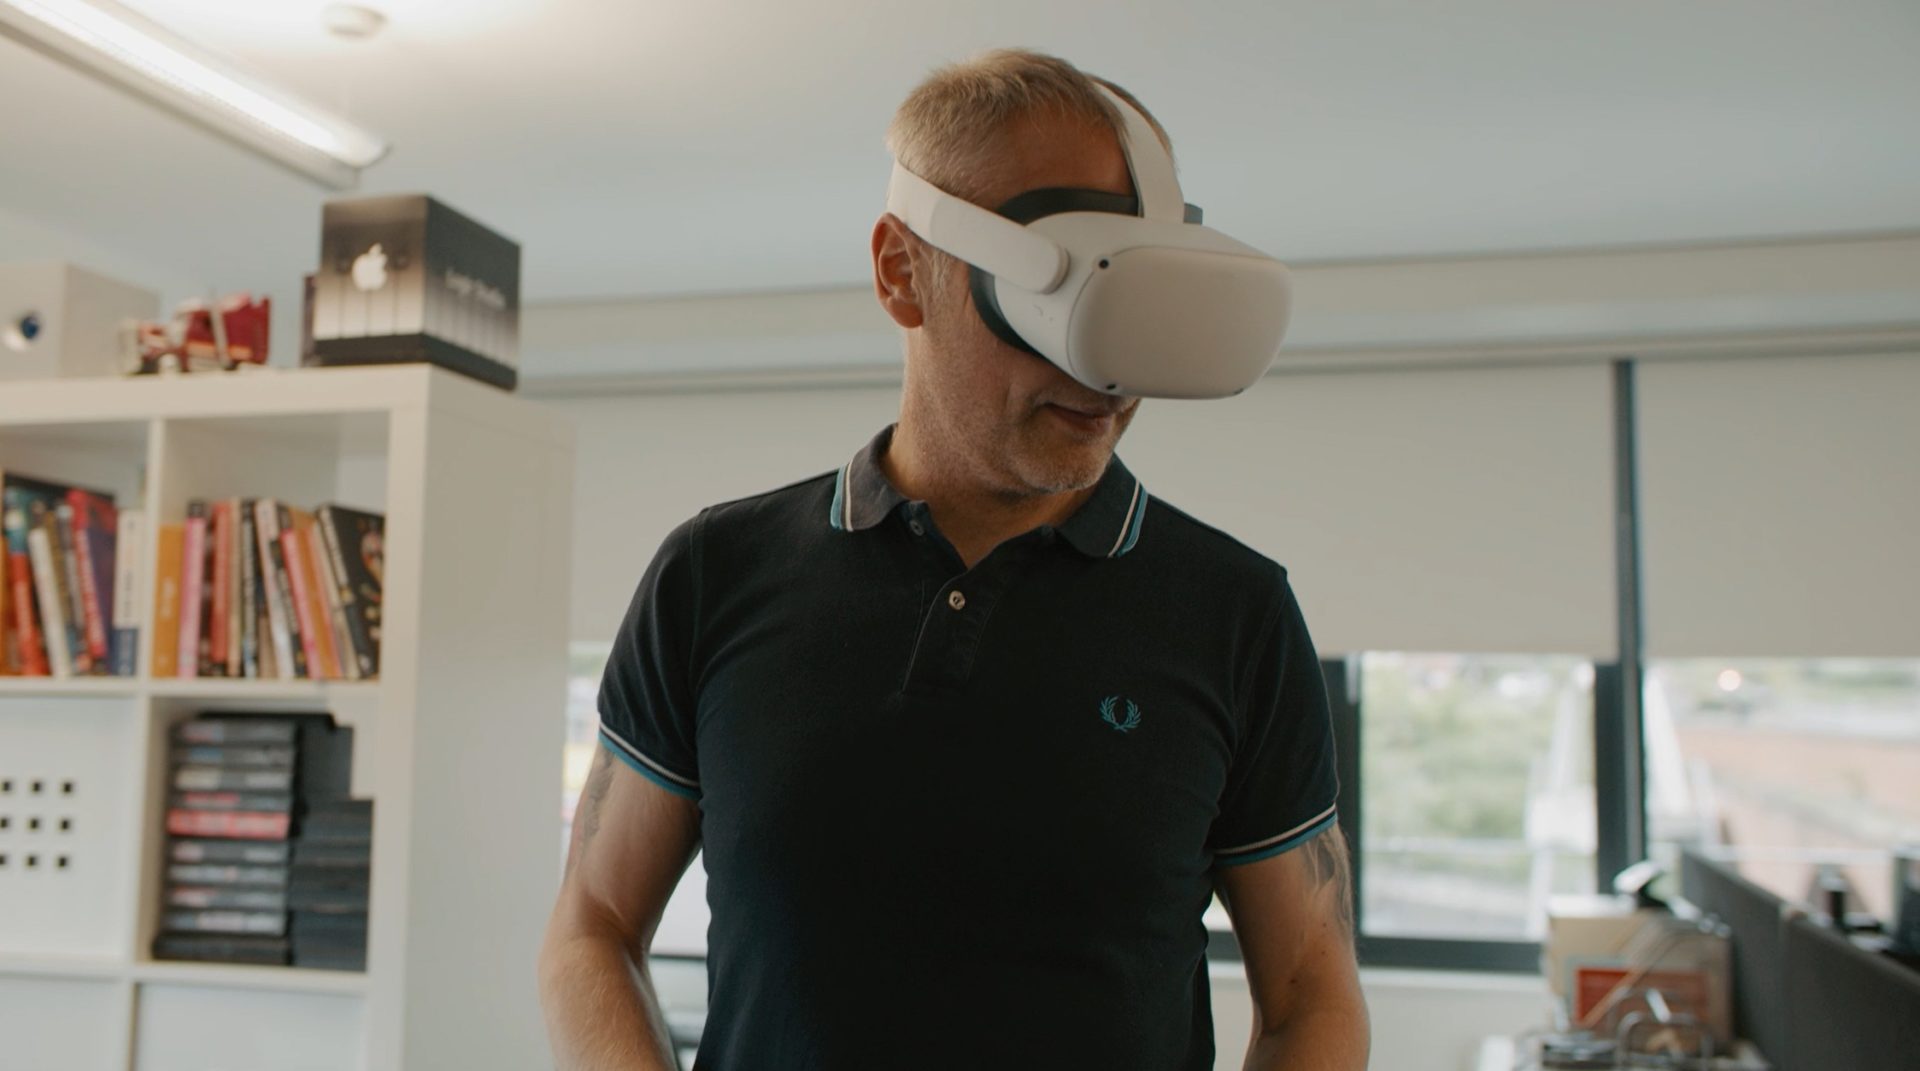 4 Benefits of Virtual Reality in the Workplace